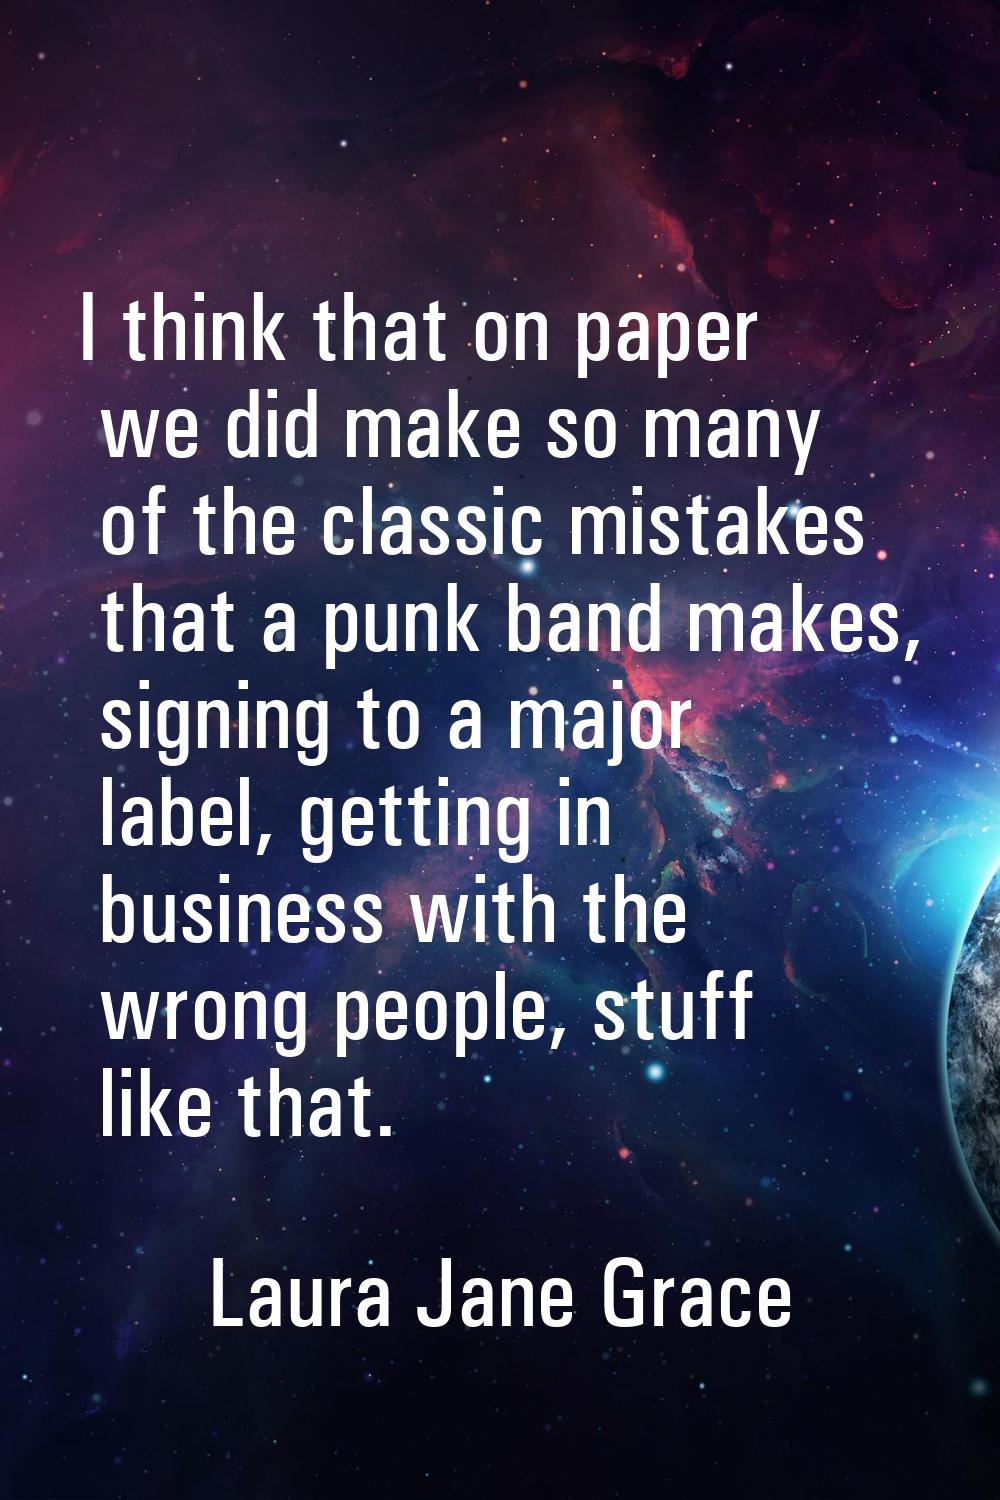 I think that on paper we did make so many of the classic mistakes that a punk band makes, signing t